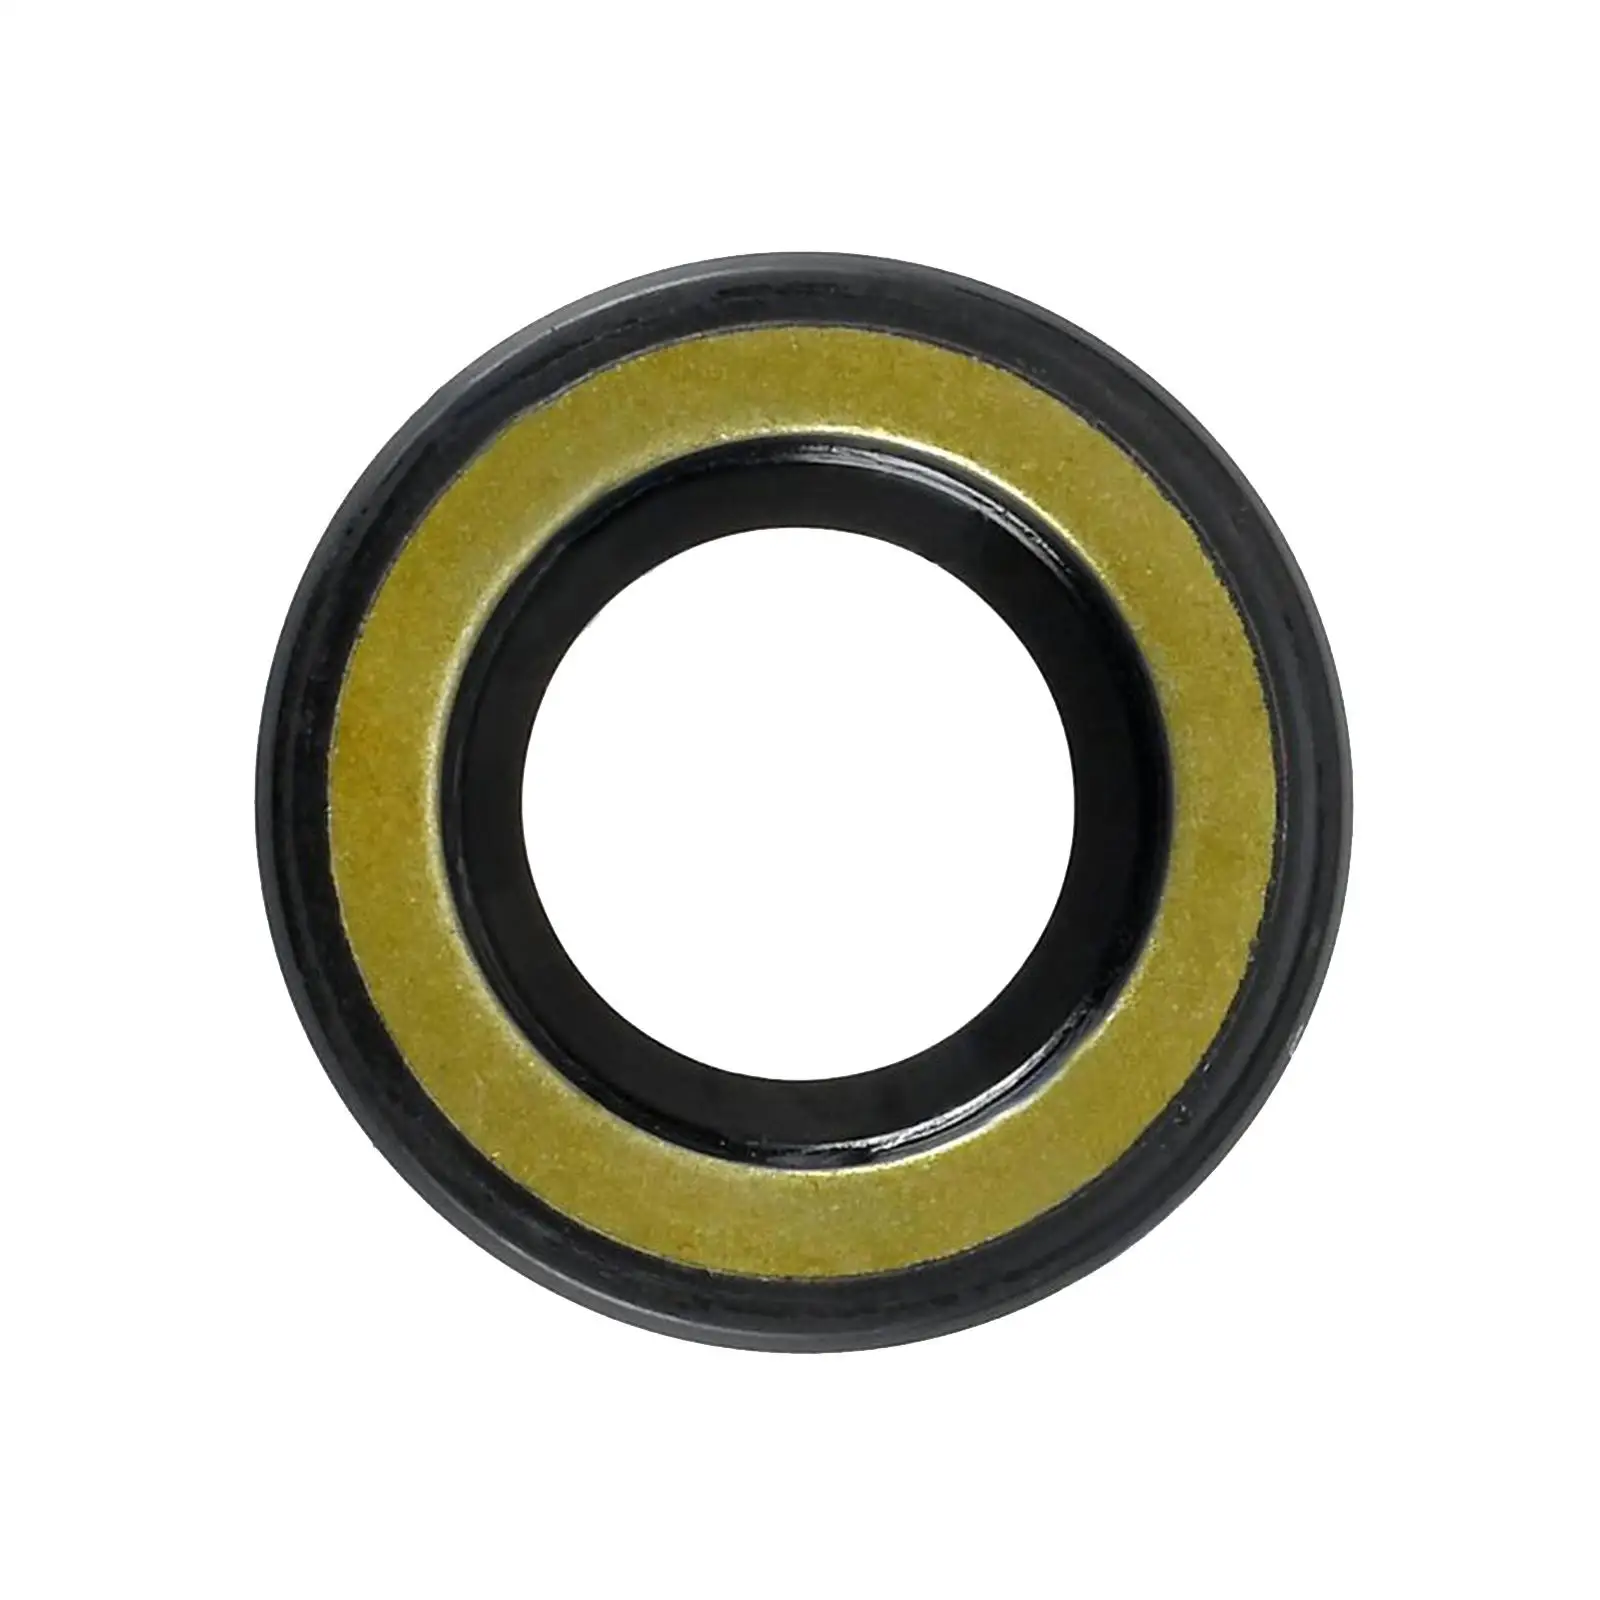 93101-20M07 Oil Seal Outboard Propeller Shaft Seal for Yamaha Outboard Engine 2T 25HP 30HP Accessories Easy Installation